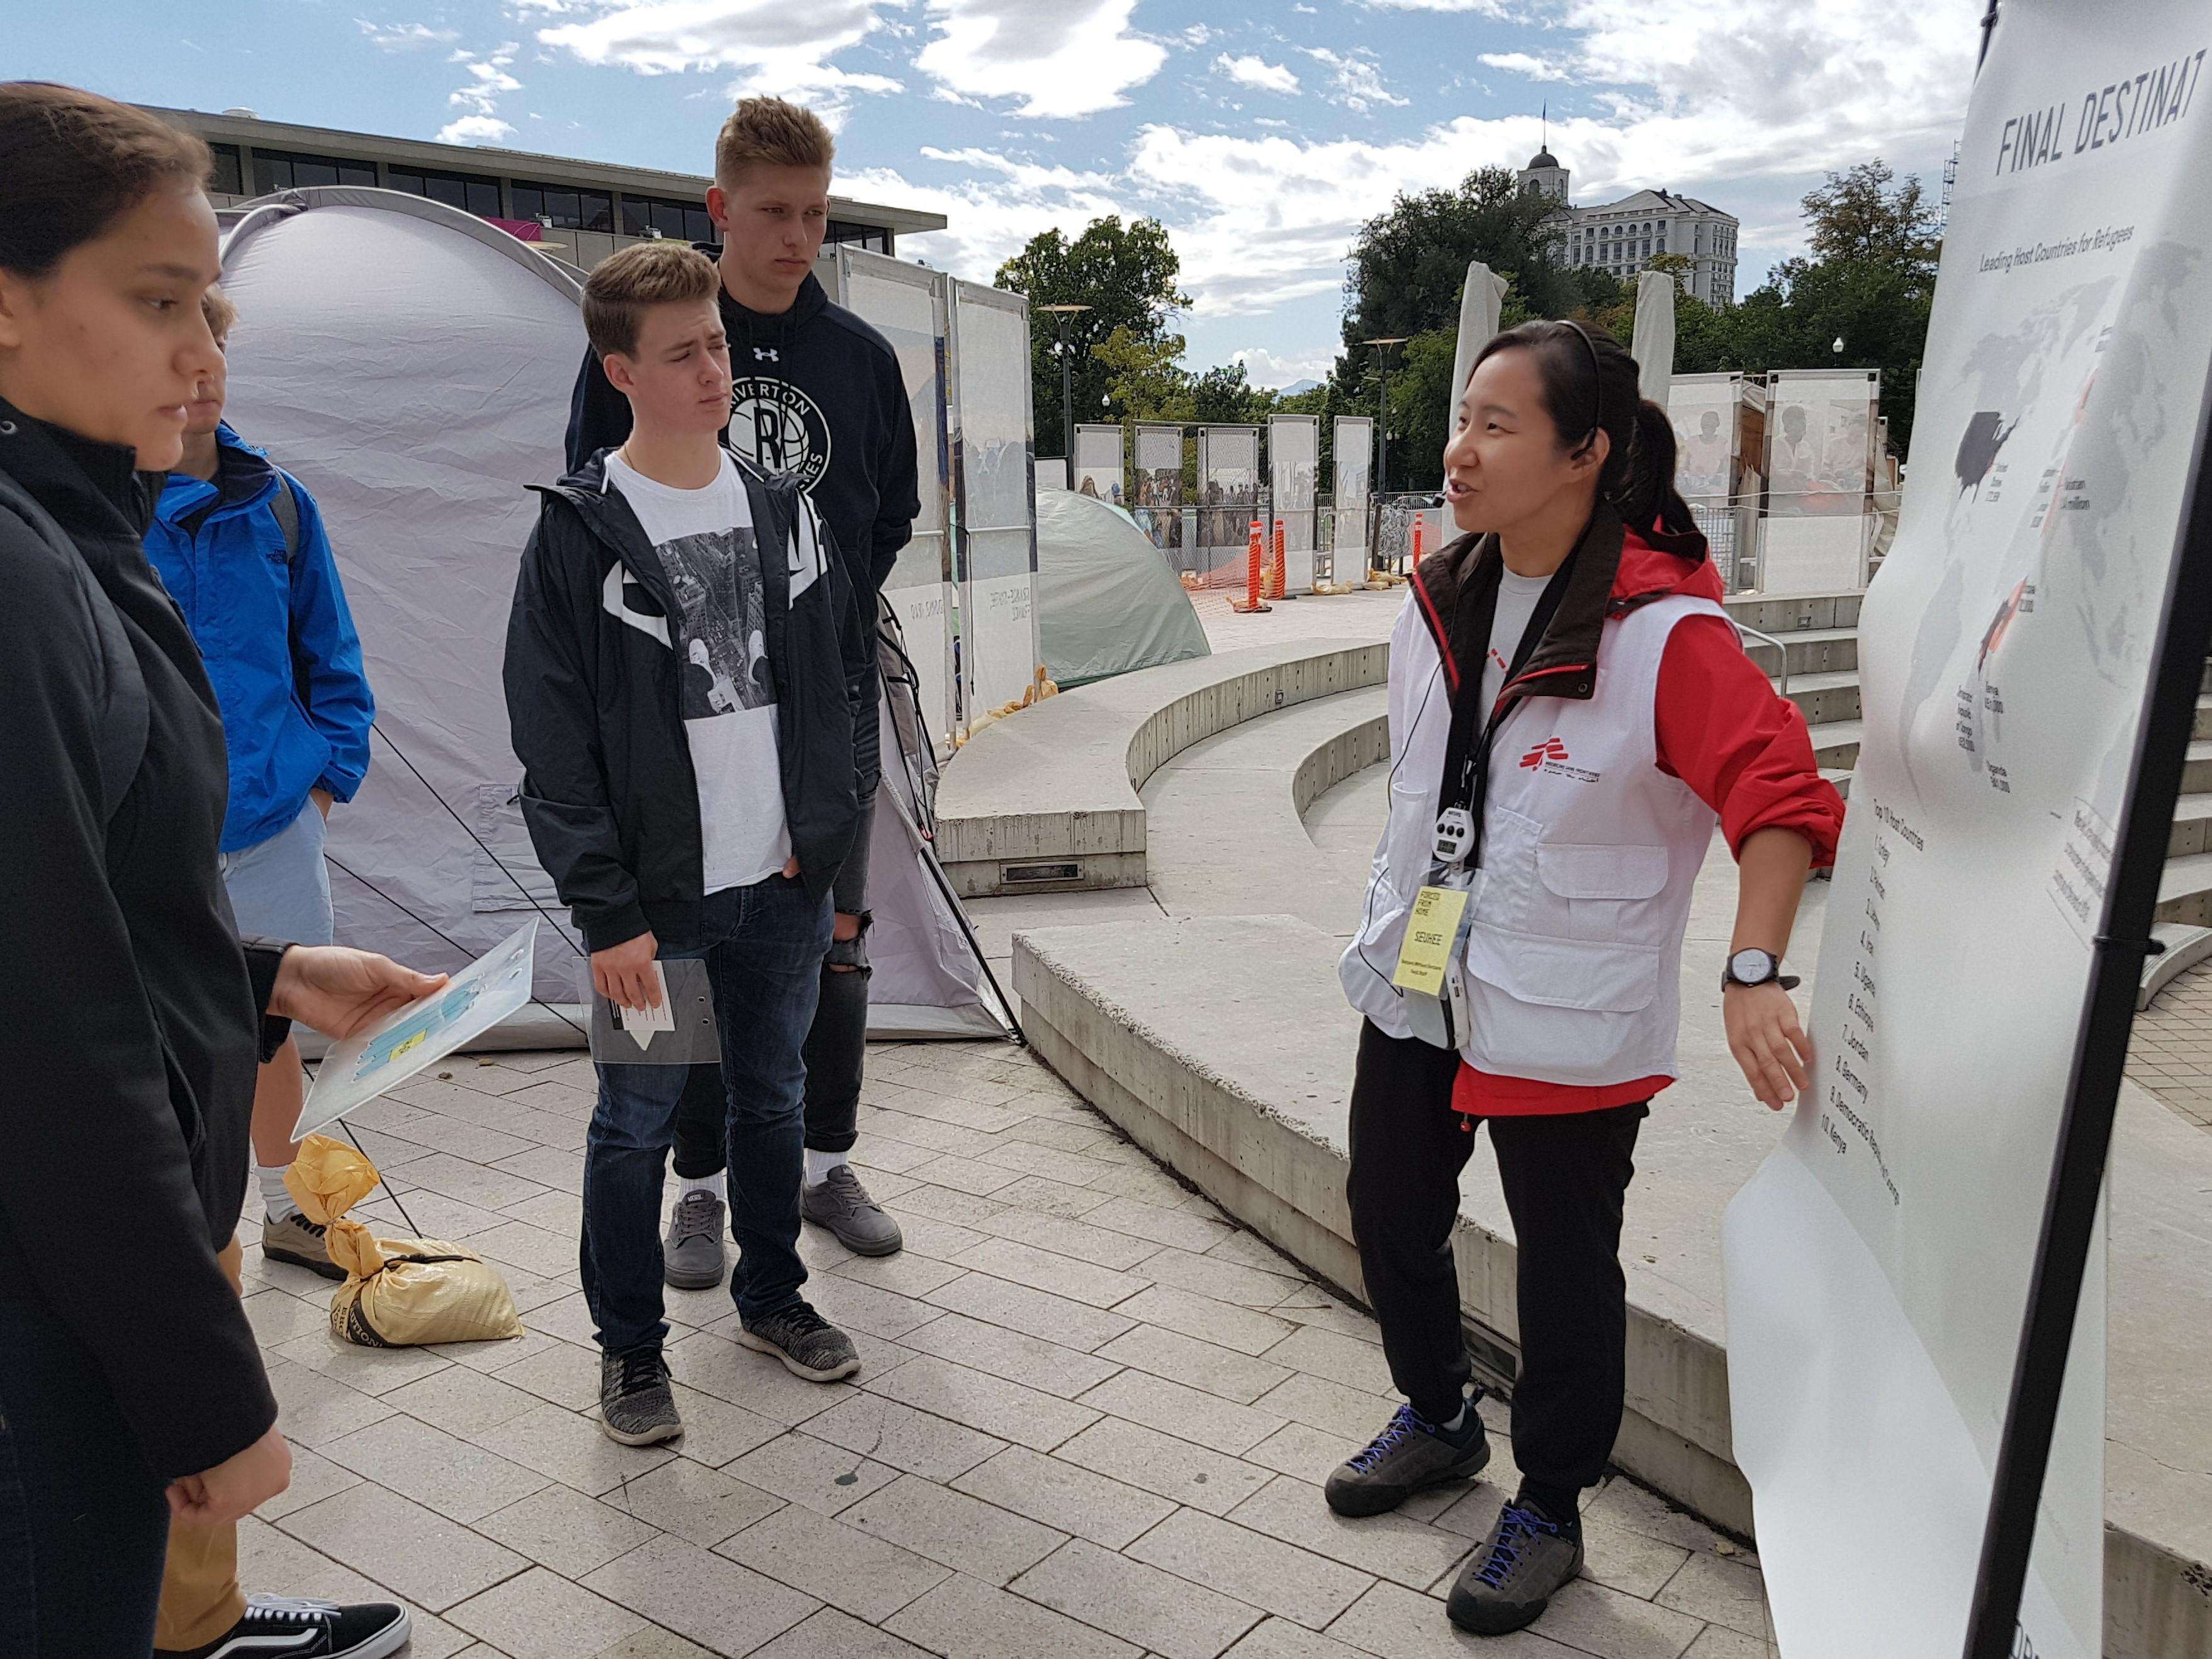 Dr. Seuhee Yoo leads a student group through the Forced From Home exhibition in Library Square, located in downtown Salt Lake City